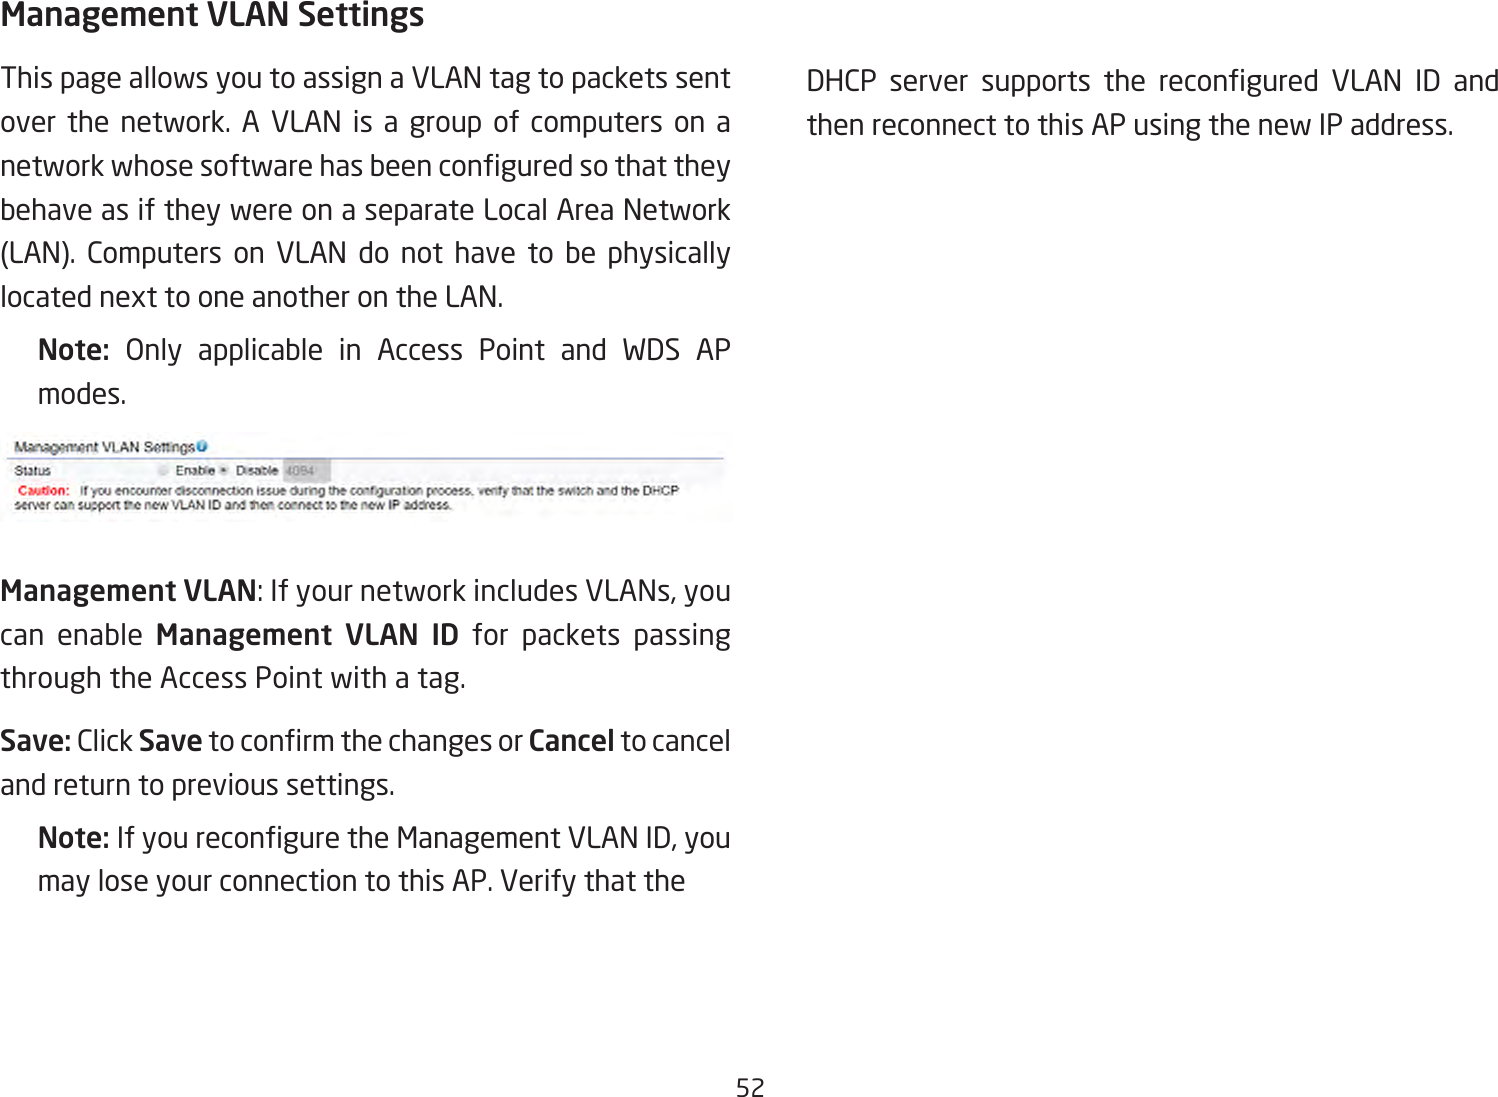 52Management VLAN SettingsThis page allows you to assign a VLAN tag to packets sent over the network. A VLAN is a group of computers on a networkwhosesoftwarehasbeenconguredsothattheybehave as if they were on a separate Local Area Network (LAN). Computers on VLAN do not have to be physically located next to one another on the LAN.Note:  Only applicable in Access Point and WDS APmodes.Management VLAN: If your network includes VLANs, you can enable Management VLAN ID for packets passing through the Access Point with a tag. Save: Click SavetoconrmthechangesorCancel to cancel and return to previous settings.Note: IfyoureconguretheManagementVLANID,youmay lose your connection to this AP. Verify that the   DHCP server supports the recongured VLAN ID andthen reconnect to this AP using the new IP address. 